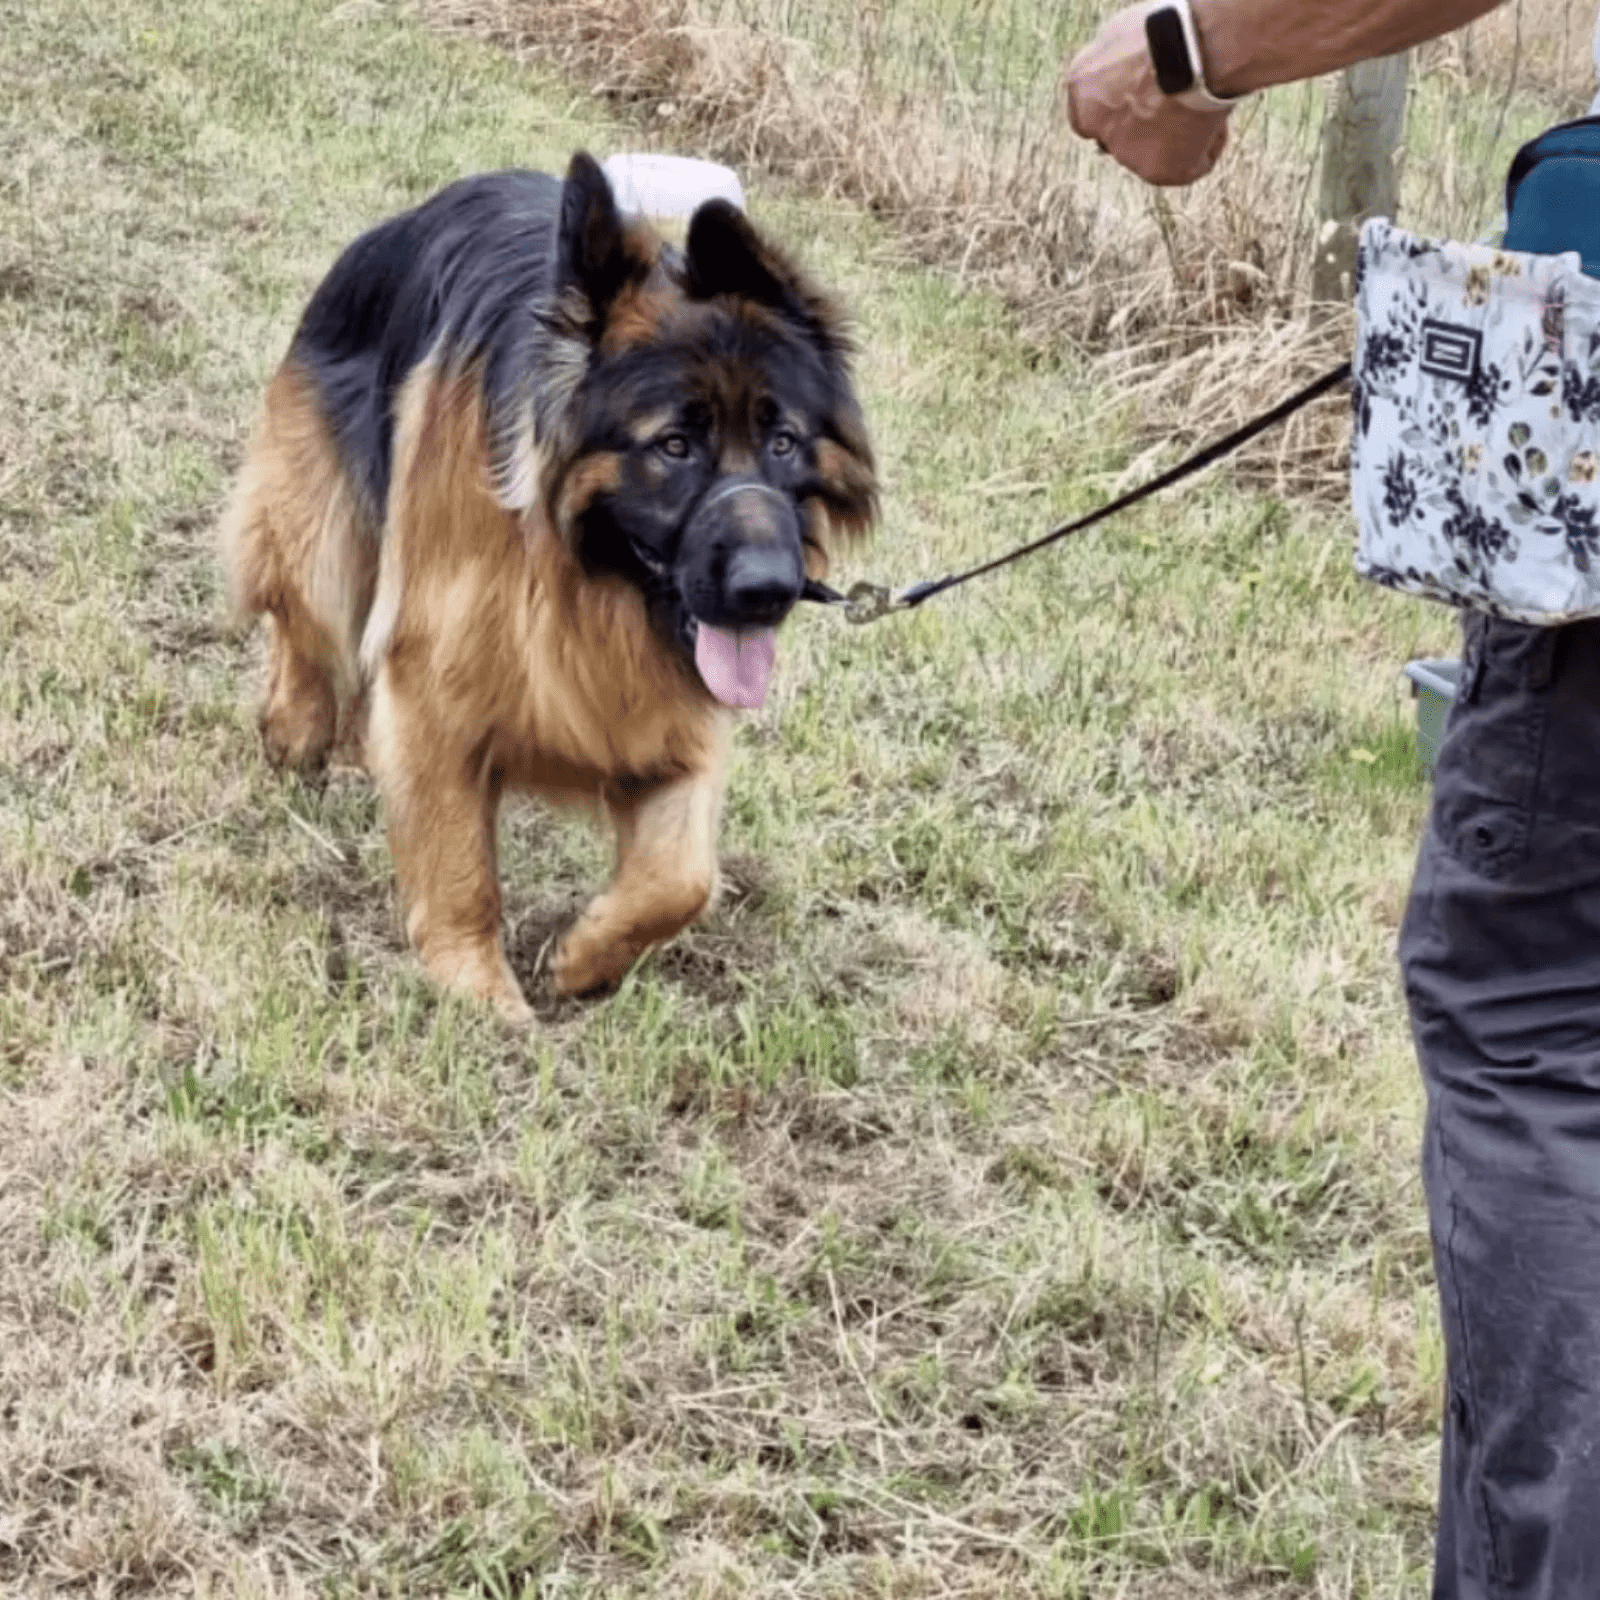 A dog named Jaeger in training during the Adventure Series course